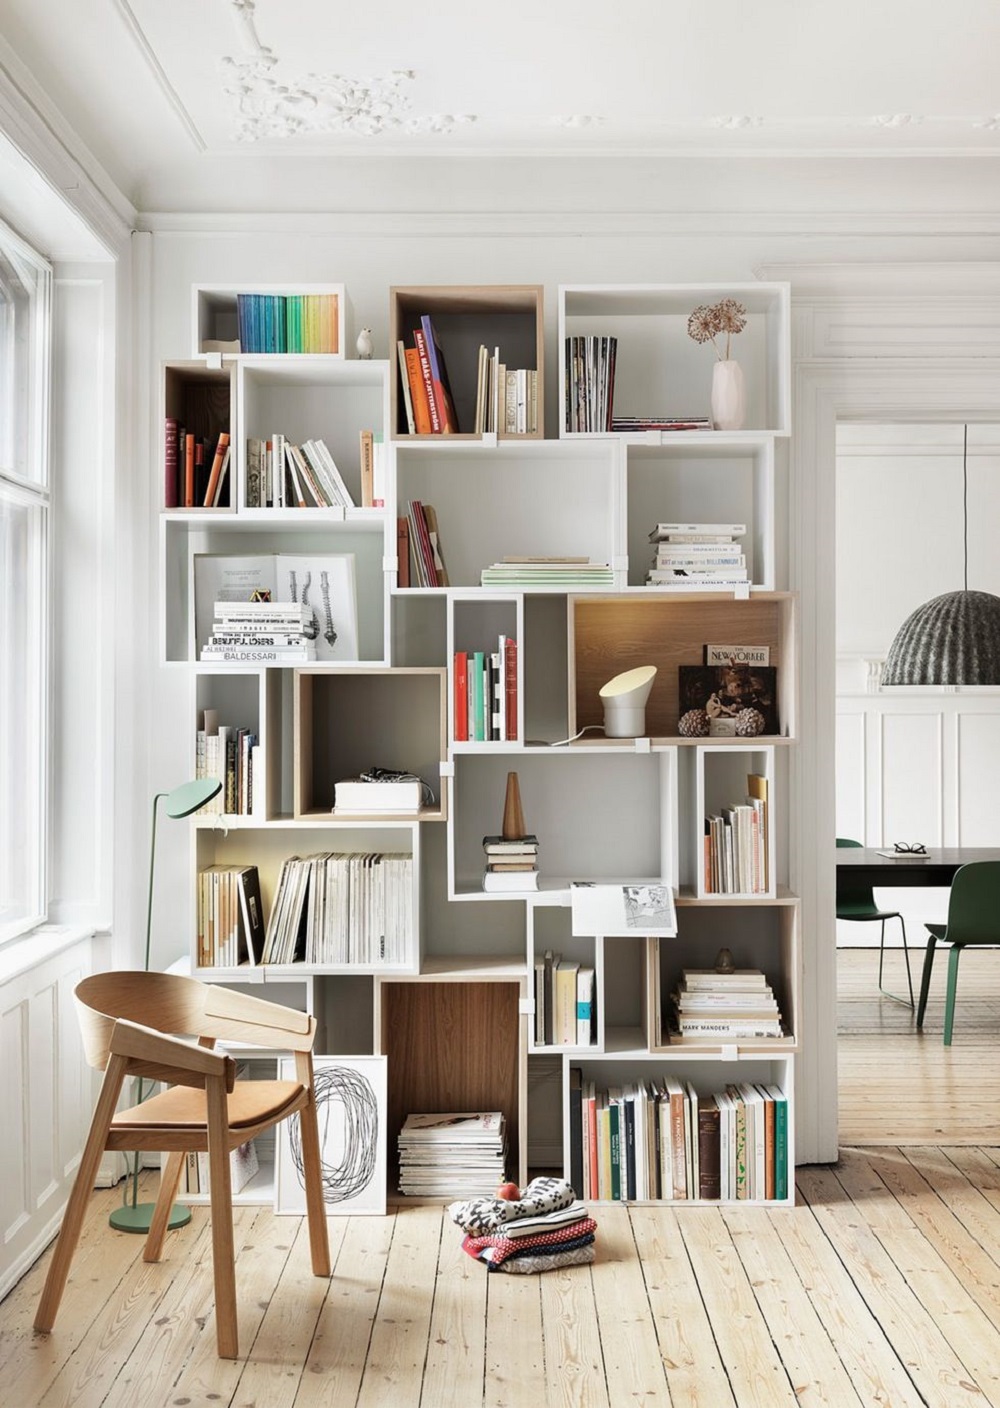 ms7 Modular shelving systems and how you can decorate with them